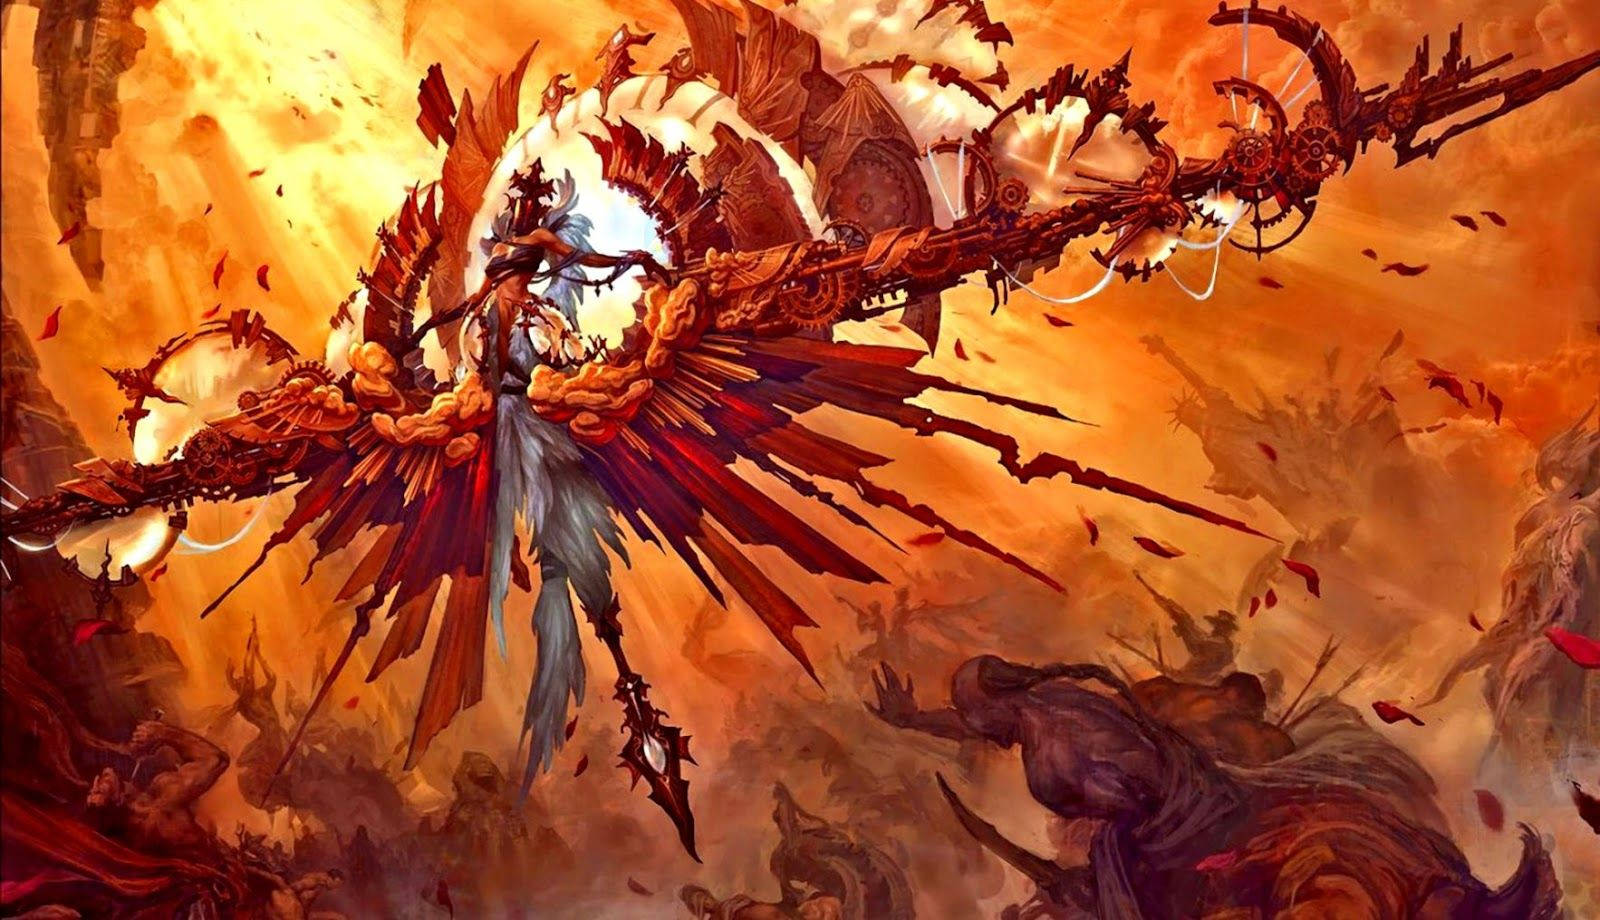 Firepowering up with Magic: The Gathering Wallpaper